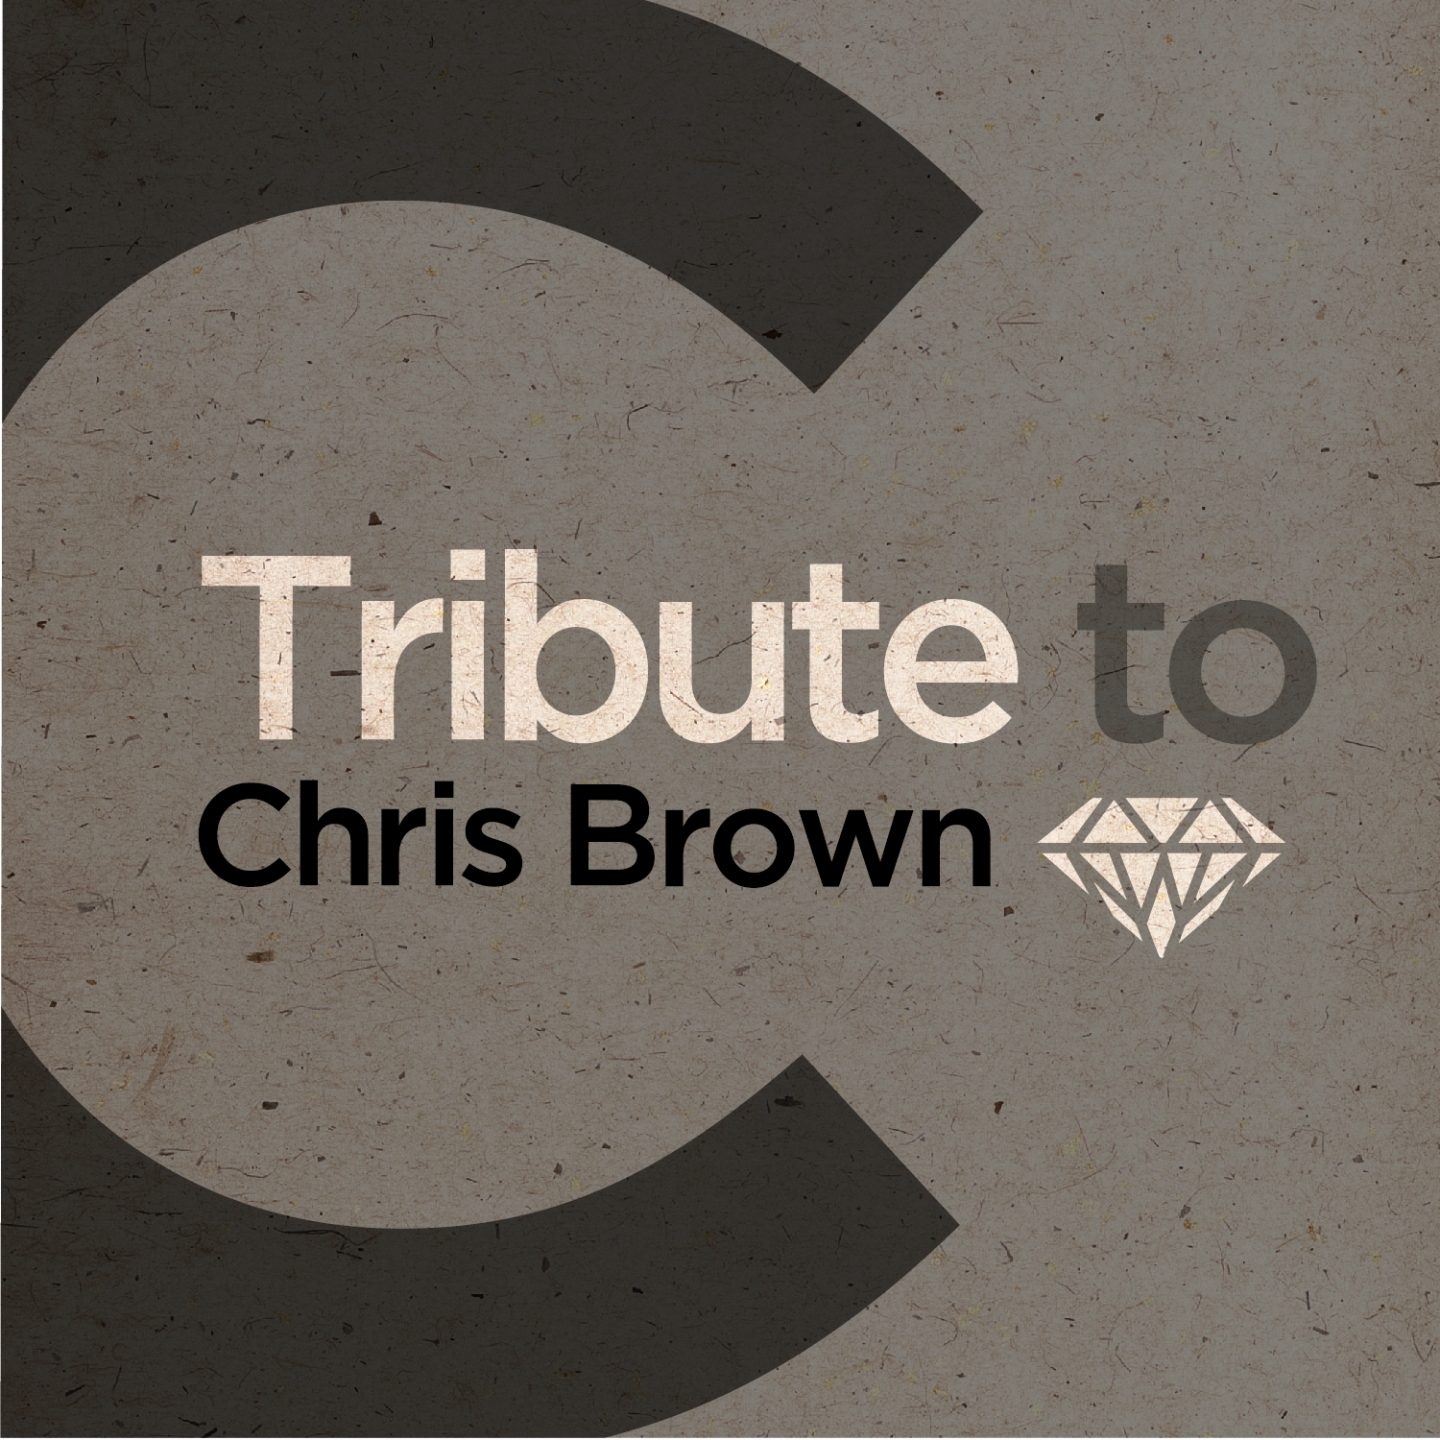 Tribute to Chris Brown